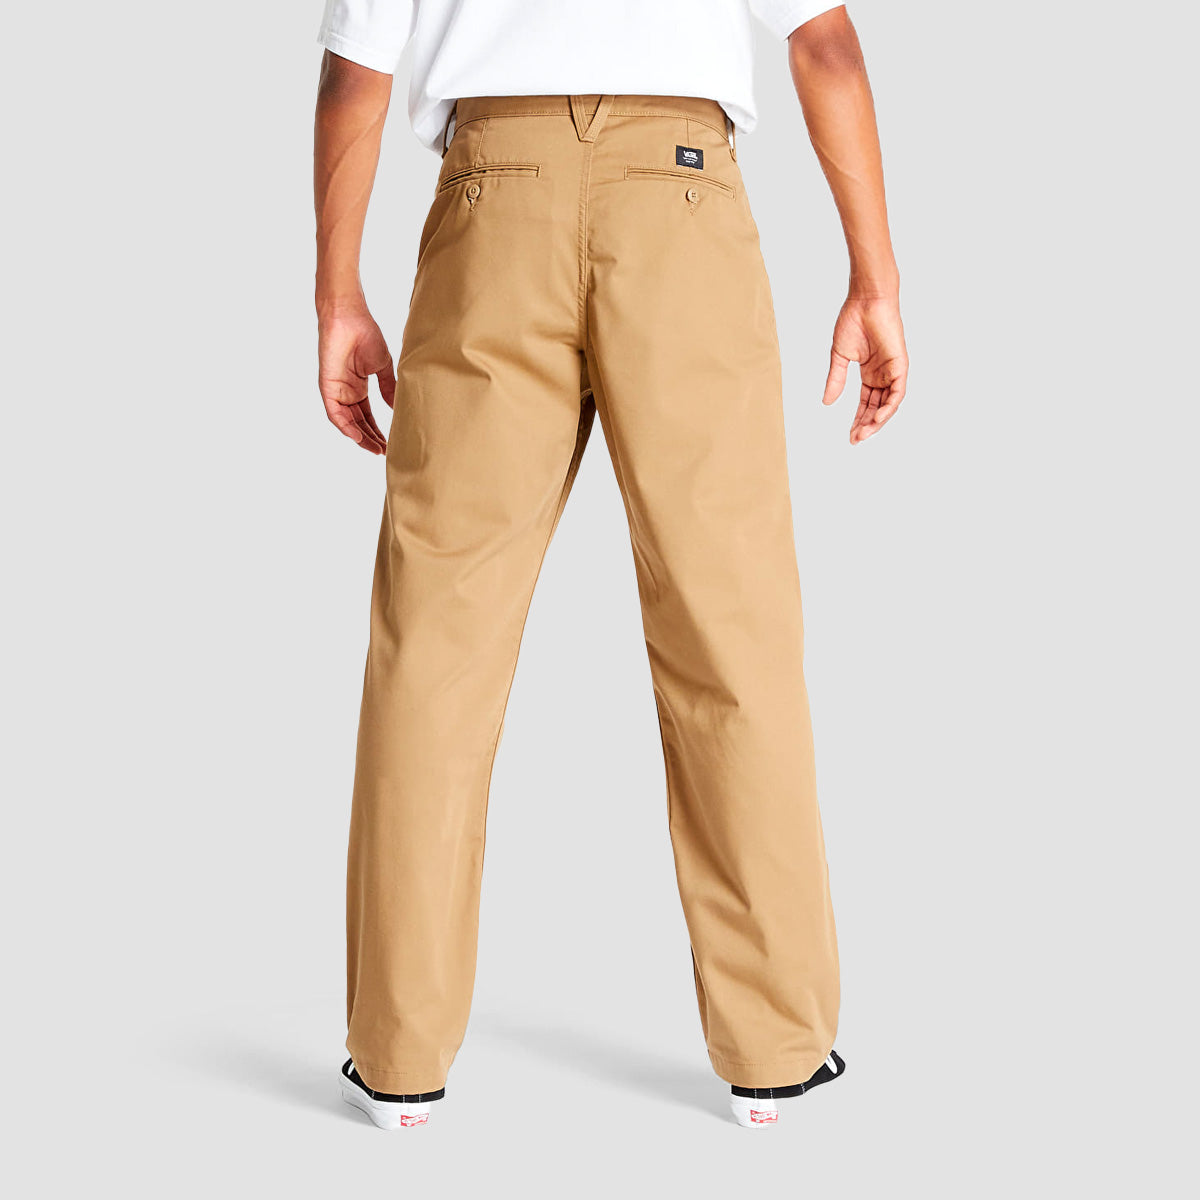 Vans Authentic Chino Baggy Pants Taos Taupe